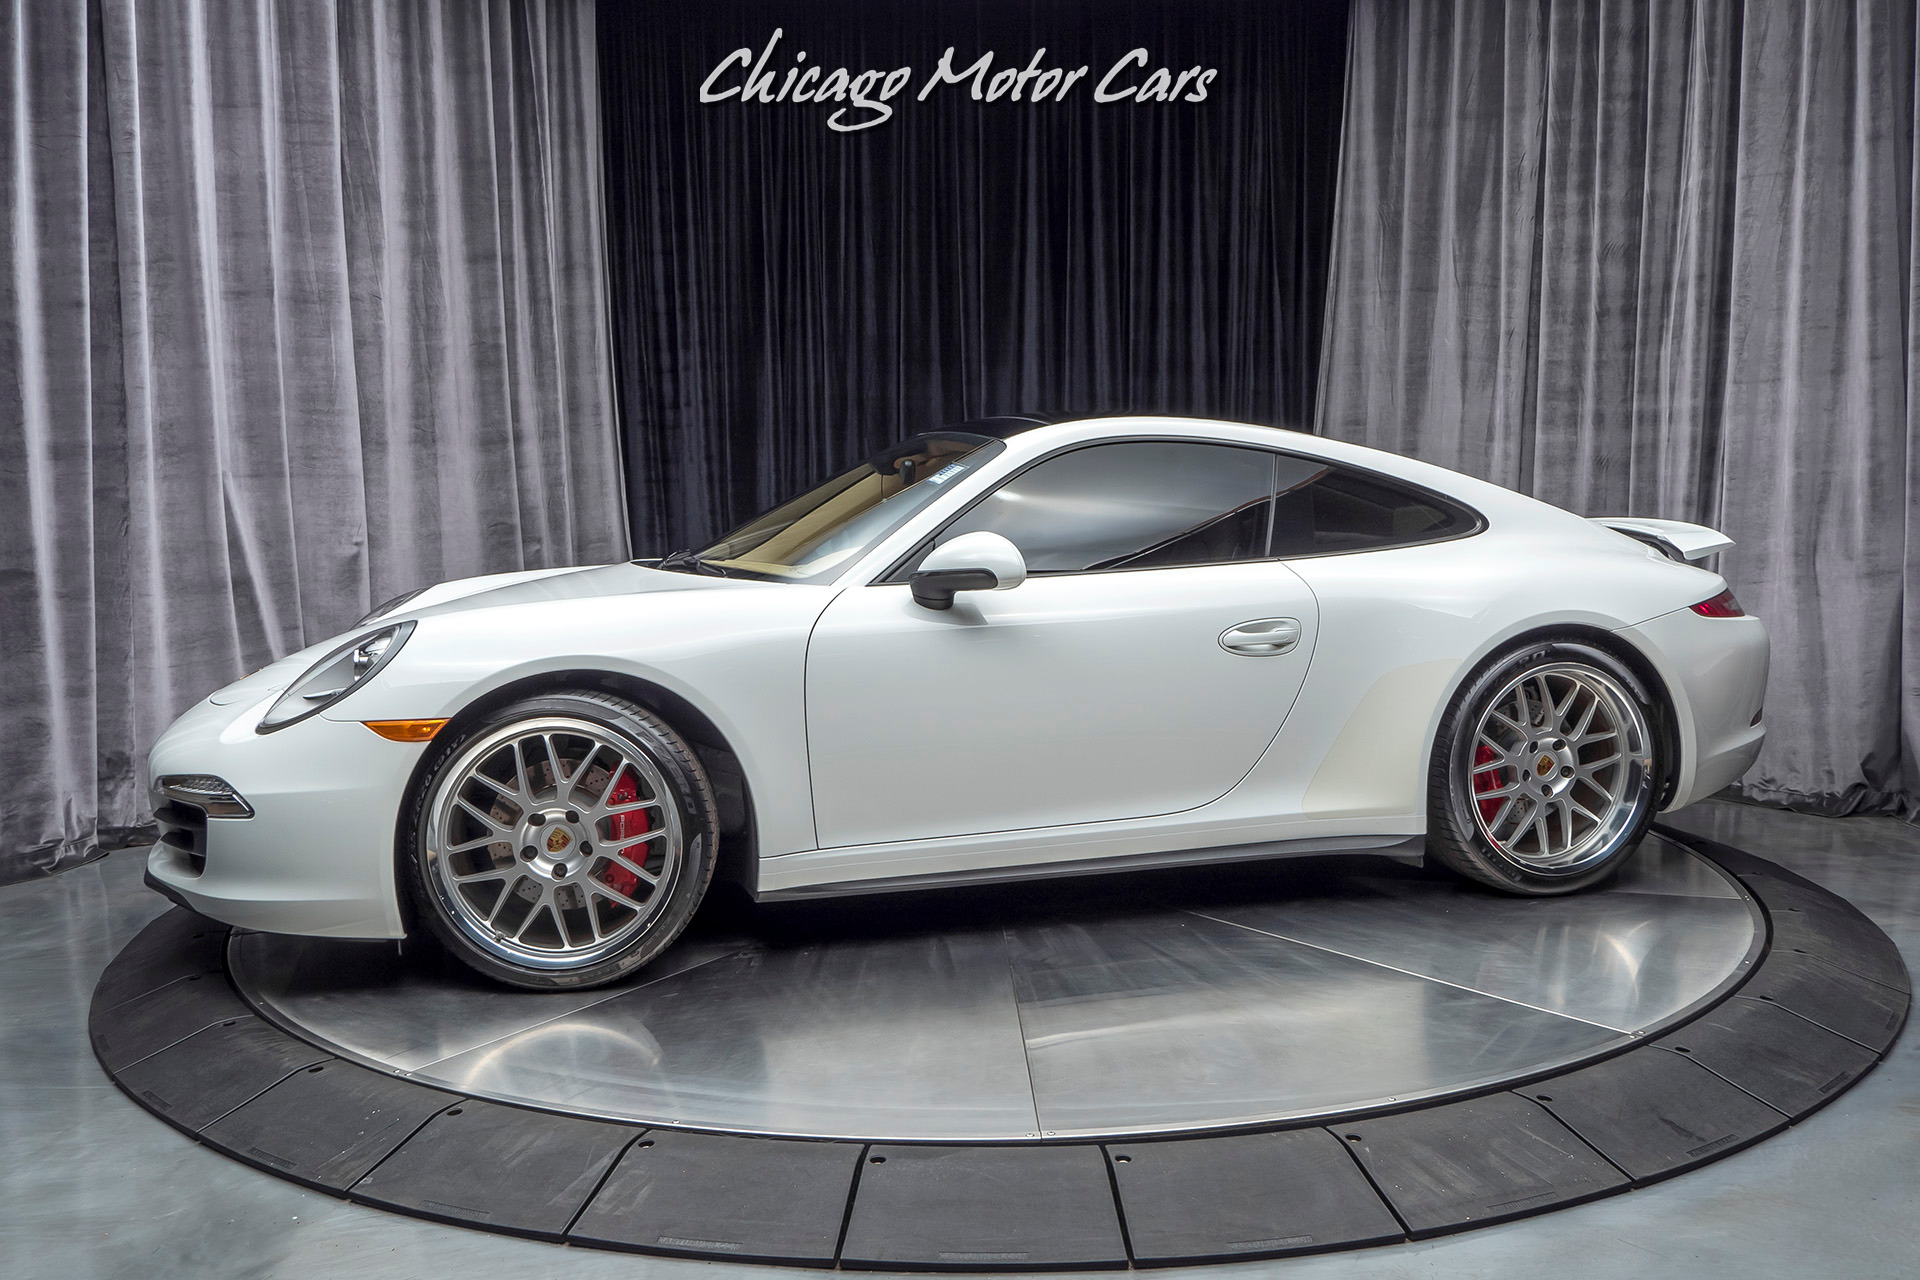 Used-2014-Porsche-911-Carrera-4S-Coupe-MSRP-117K-PDK-TRANSMISSION-BOSE-AUDIO